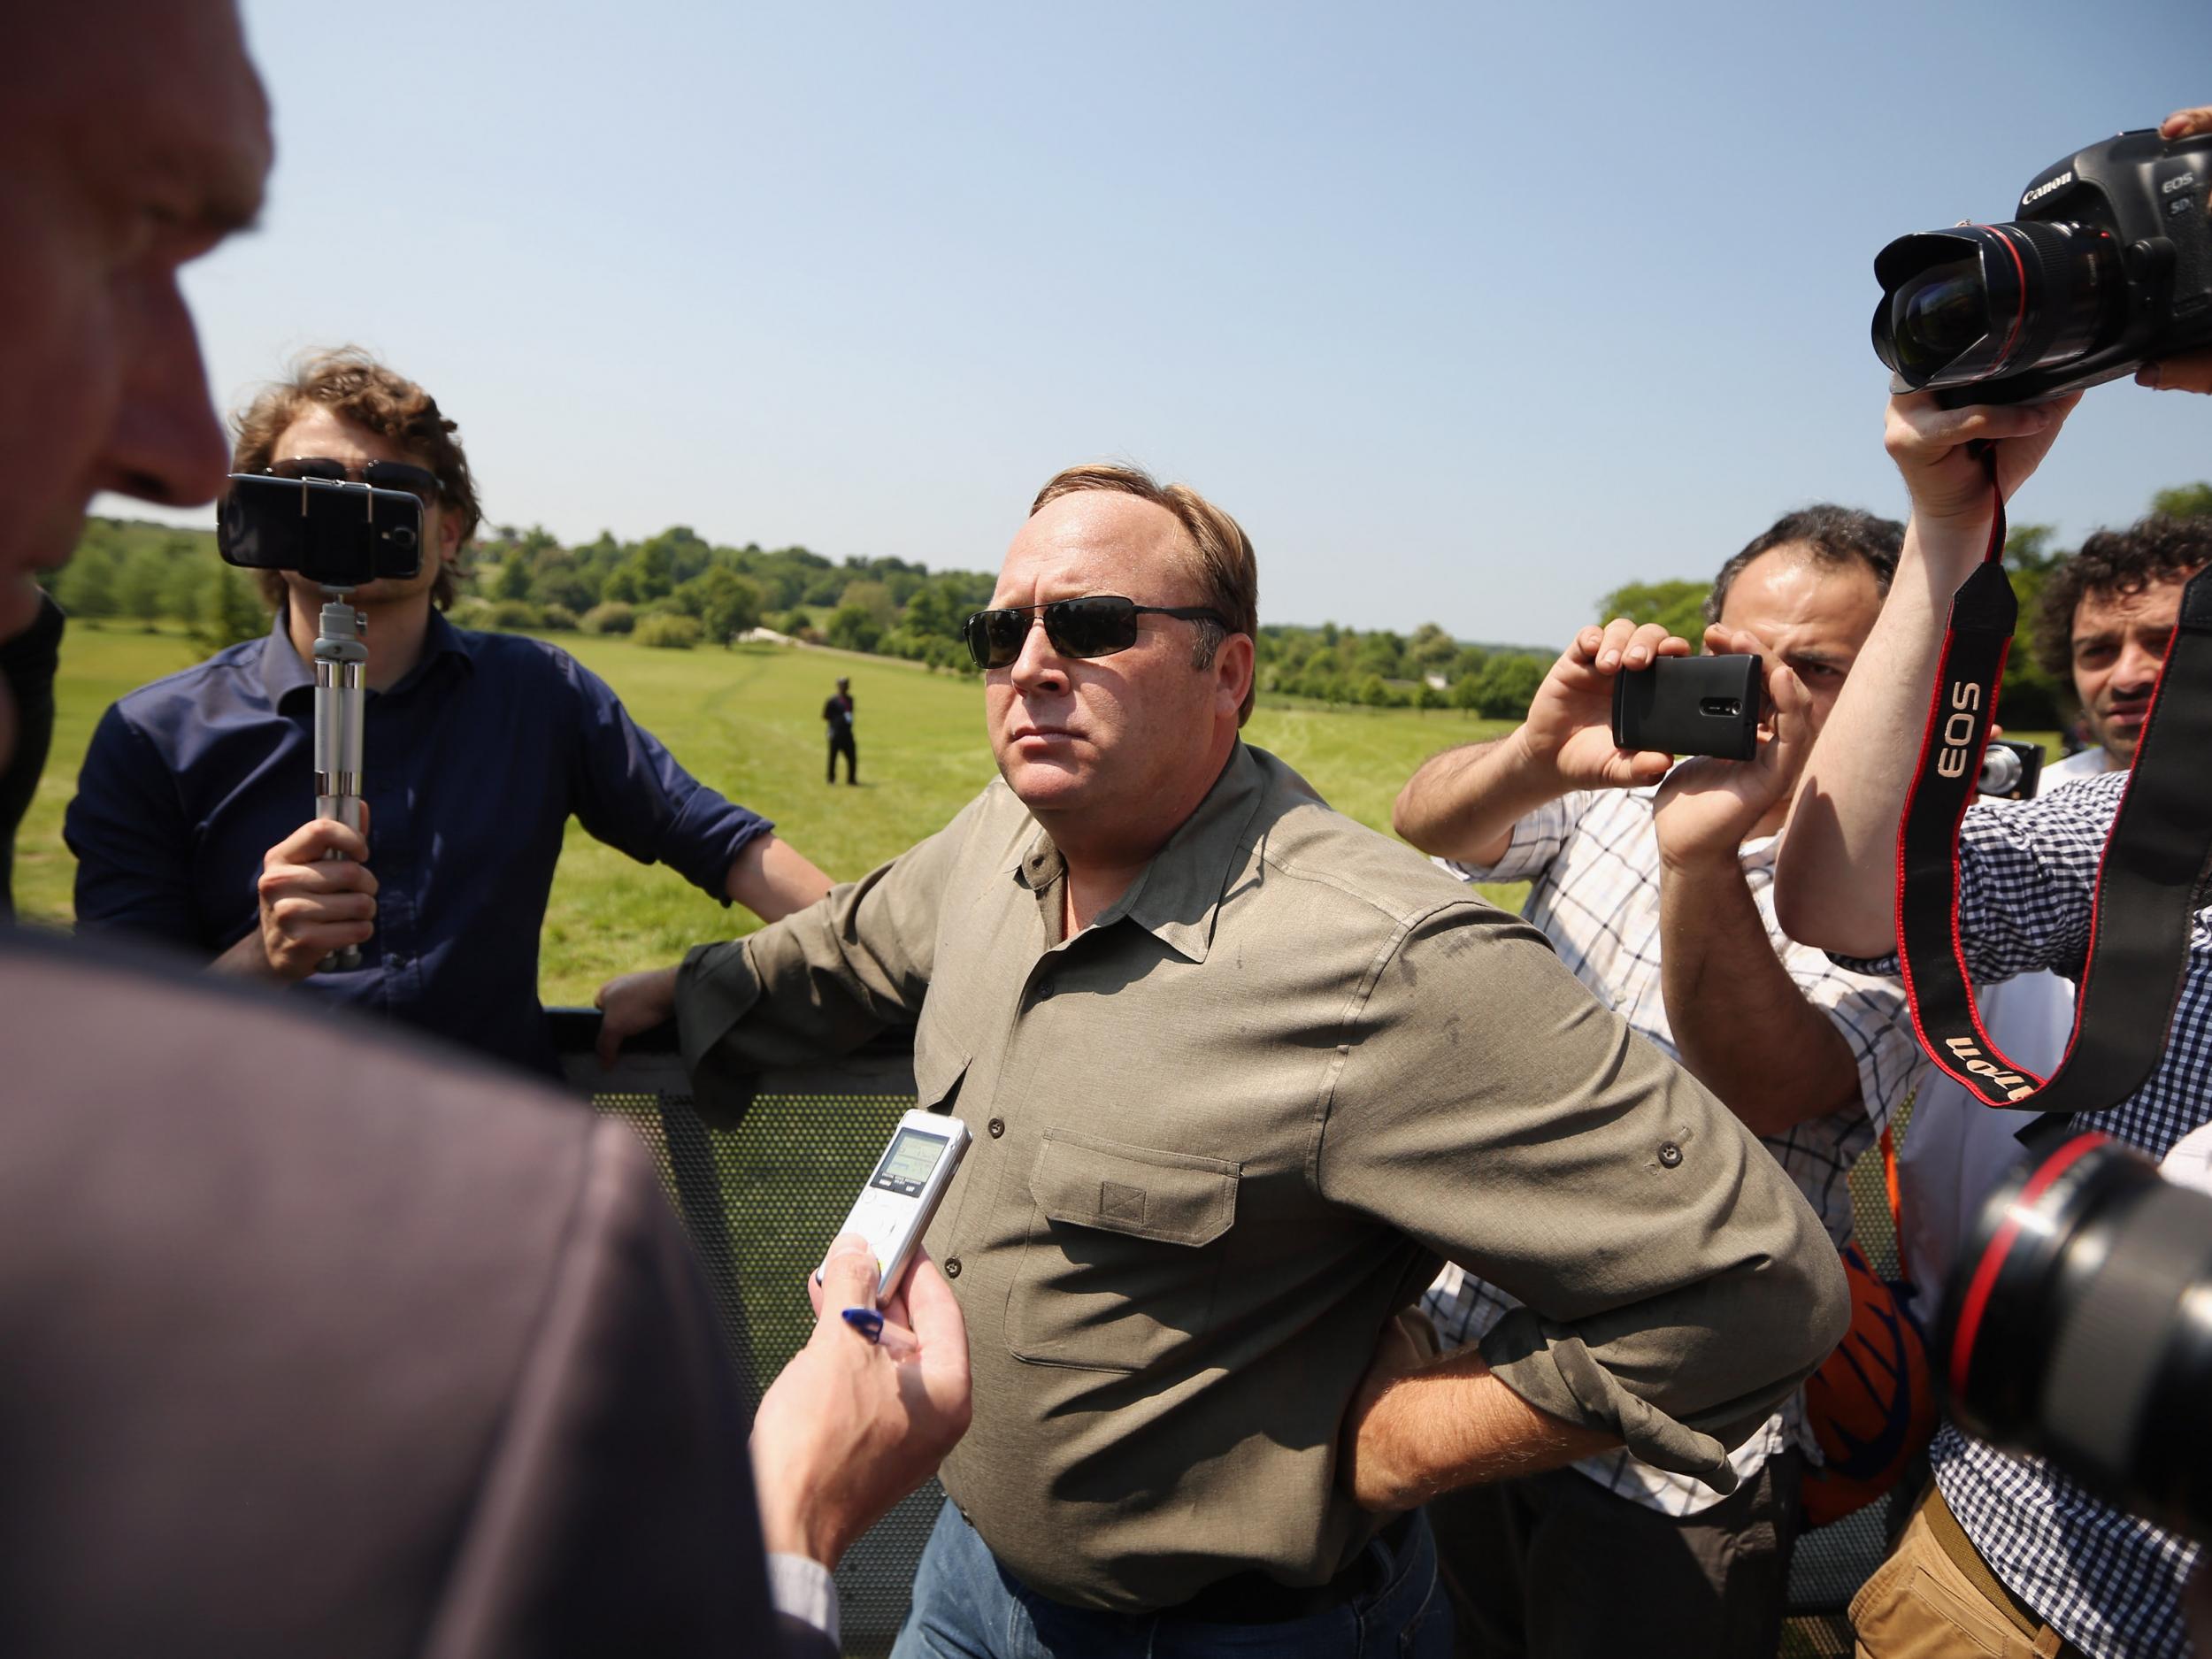 US alt-right radio host Alex Jones addressing the media at a protester encampment outside The Grove hotel in Watford, then hosting the annual Bilderbergconference, on 6 June 2013 (OliScarff/Getty)